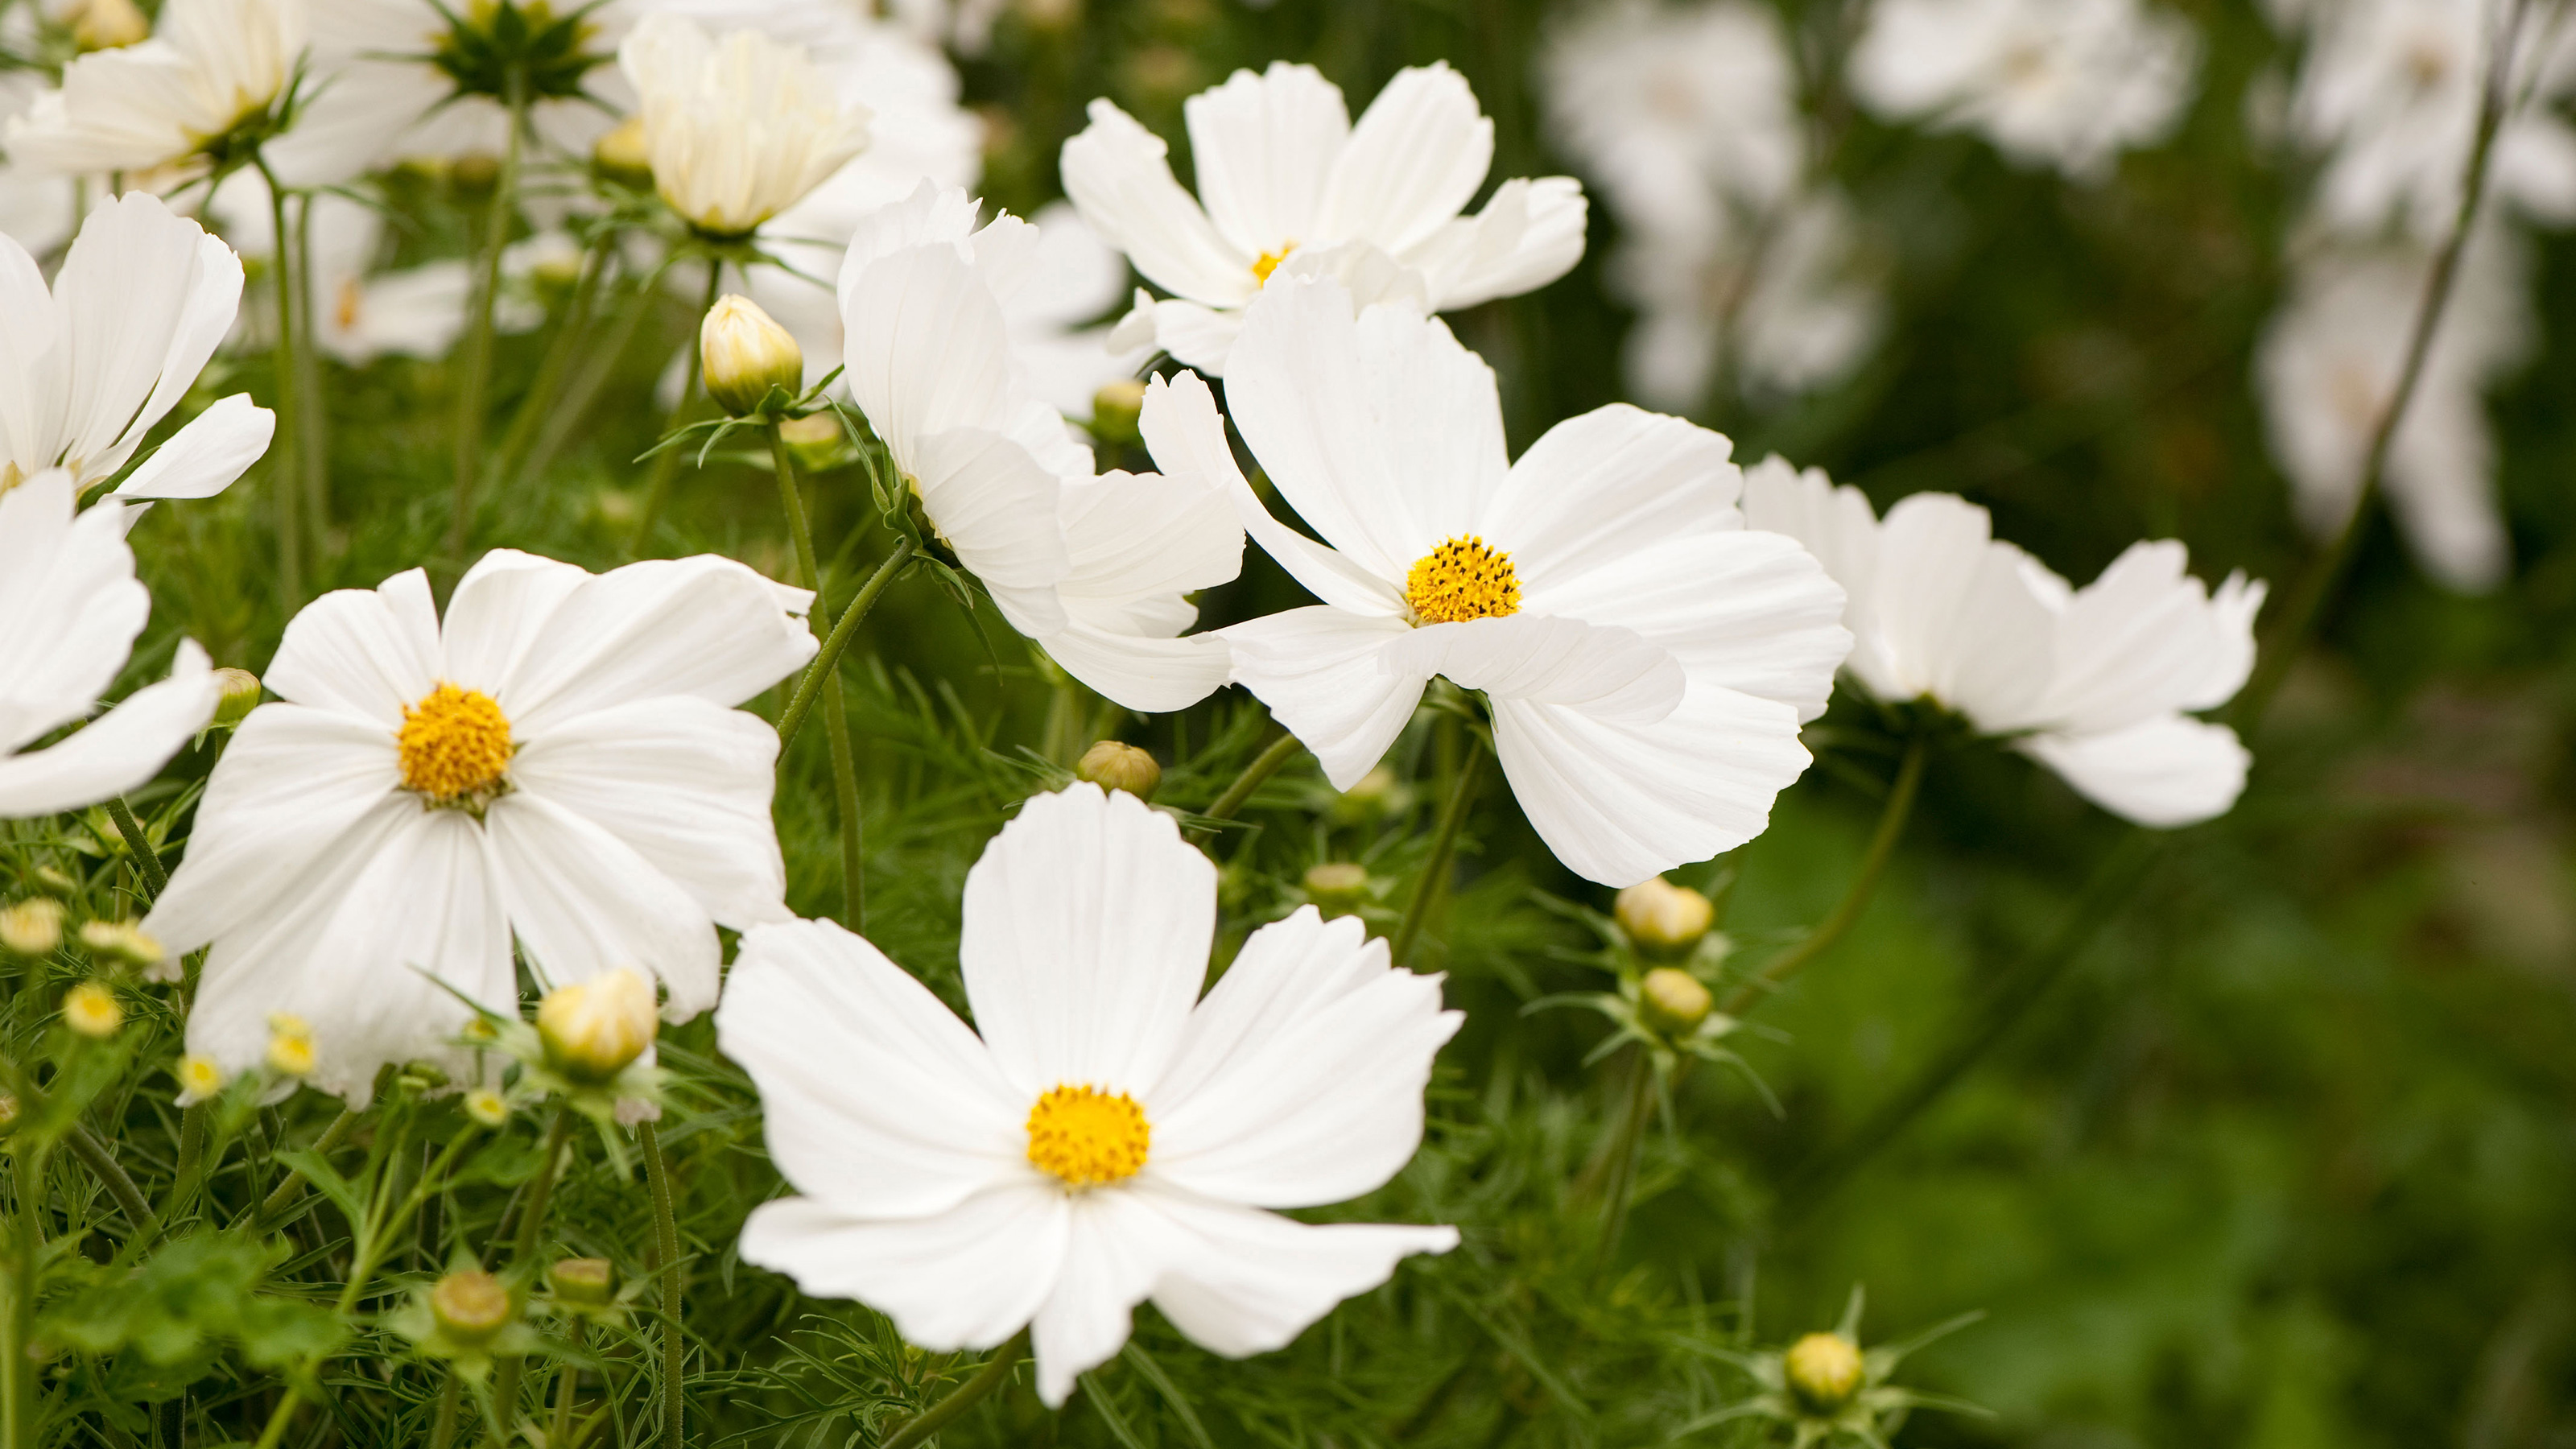 Daisies, white flowers with yellow centers, create a spring or